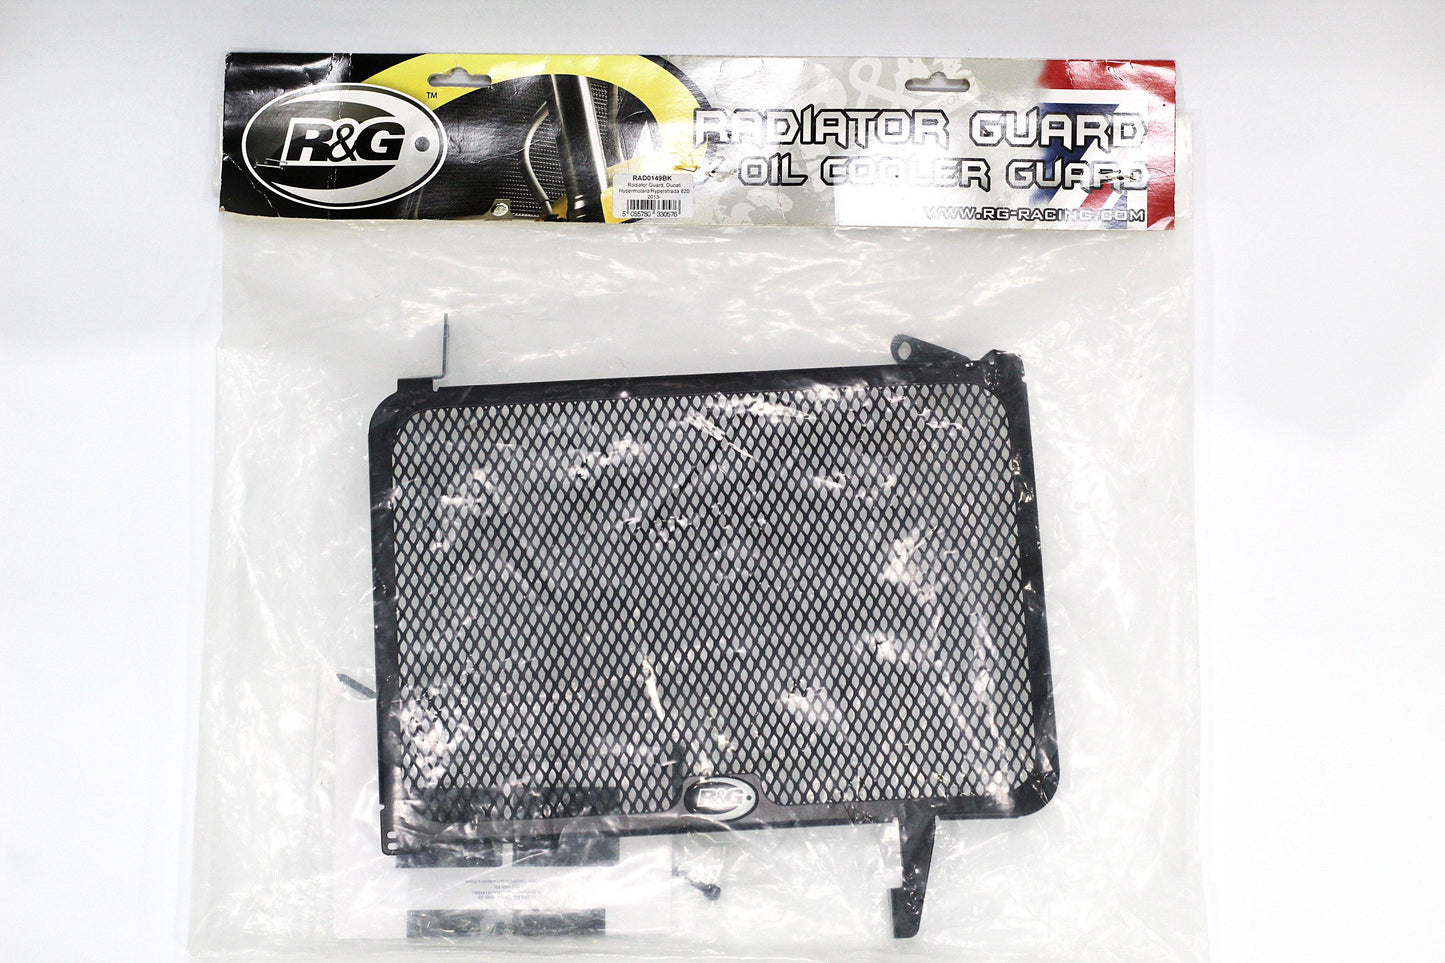 R&G Radiator Guards fits for Ducati Hypermotard 821 / 939 / 939SP & Hyperstrada 821, 939 - Durian Bikers